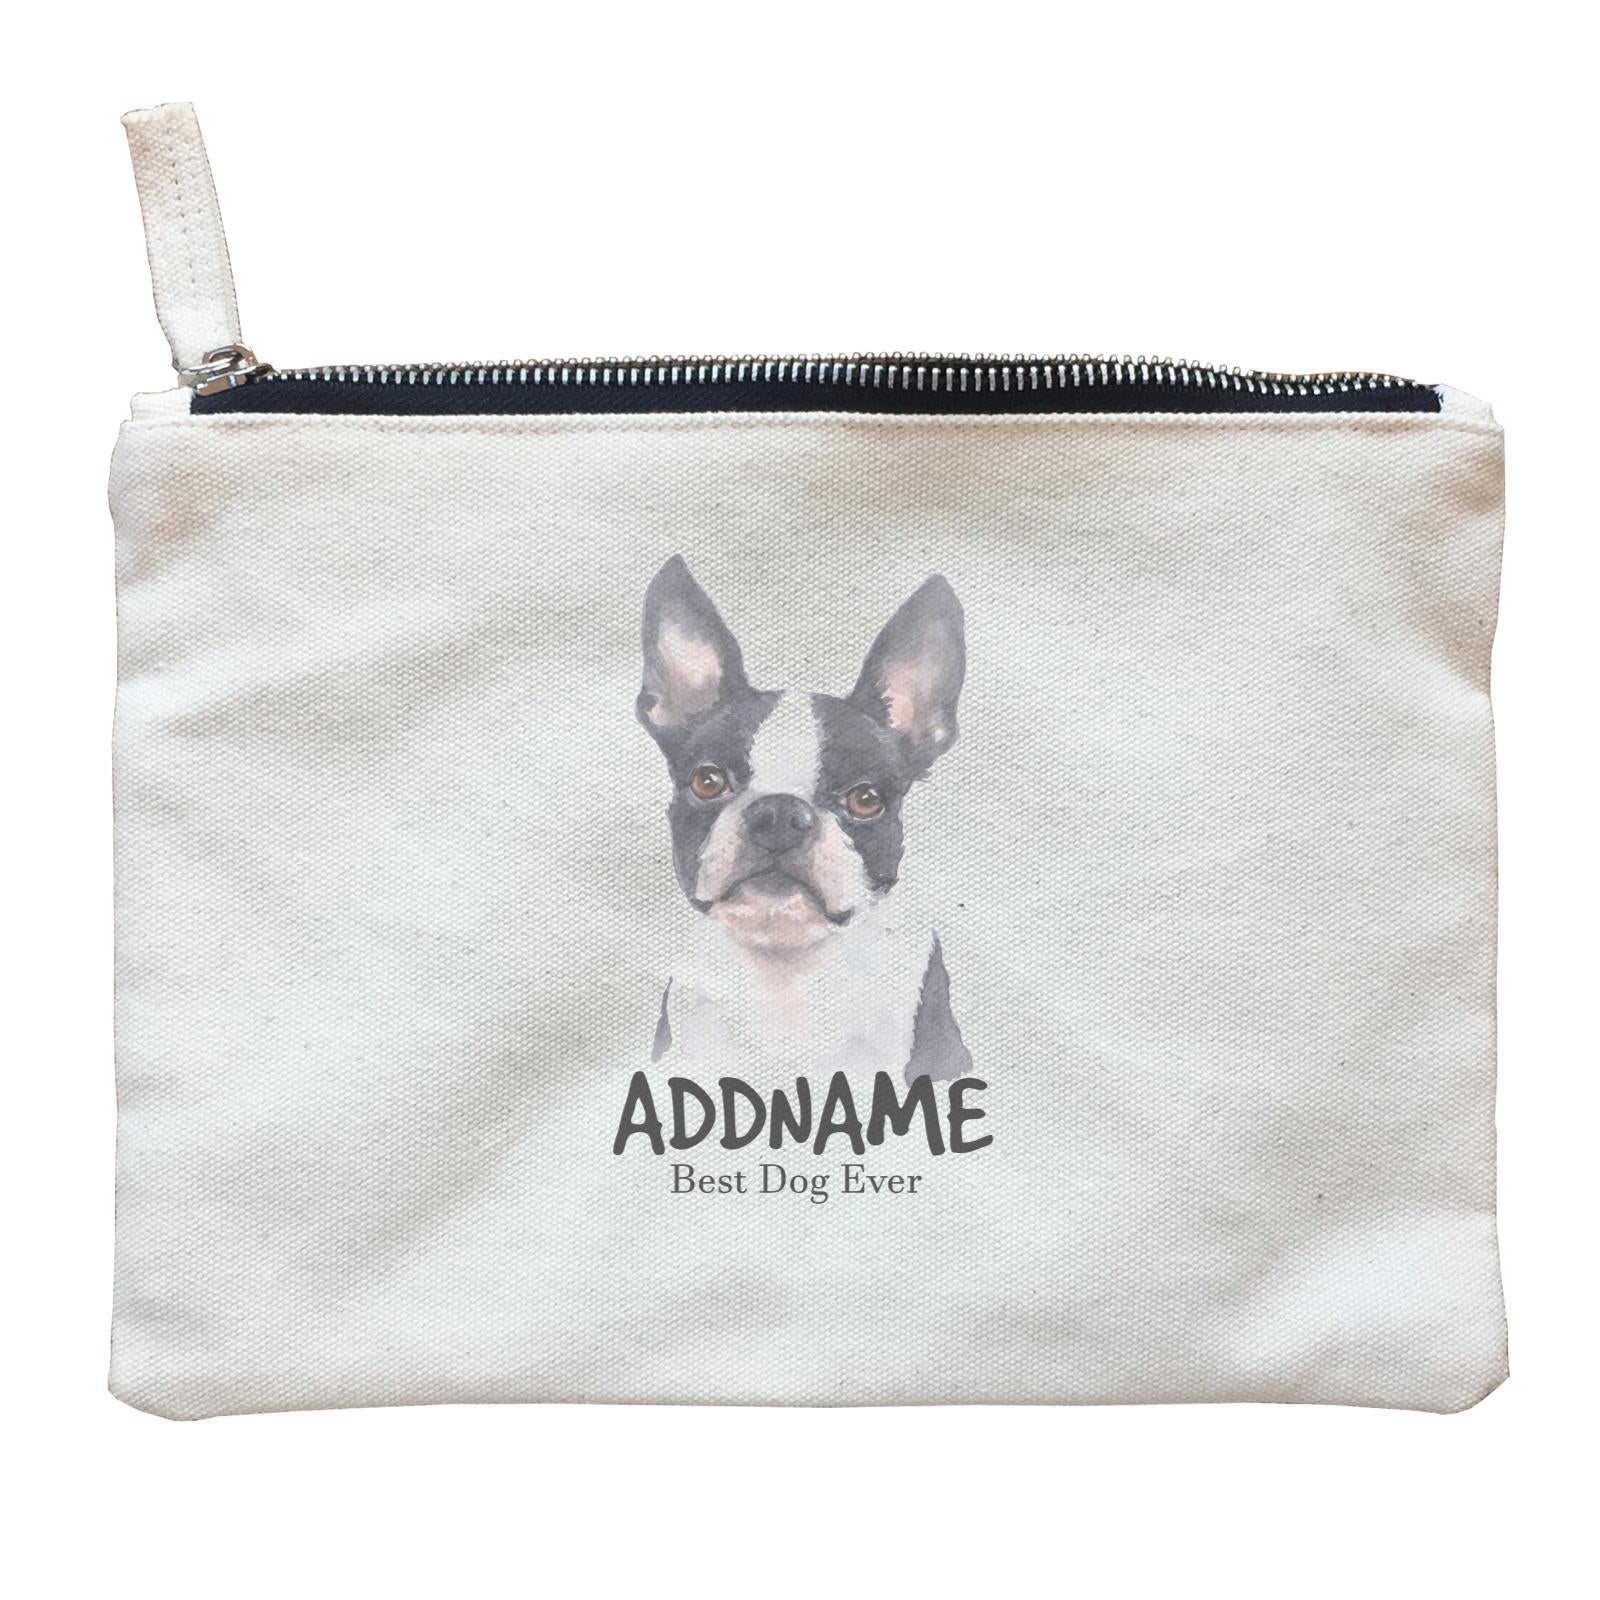 Watercolor Dog Boston Terrier Front Best Dog Ever Addname Zipper Pouch